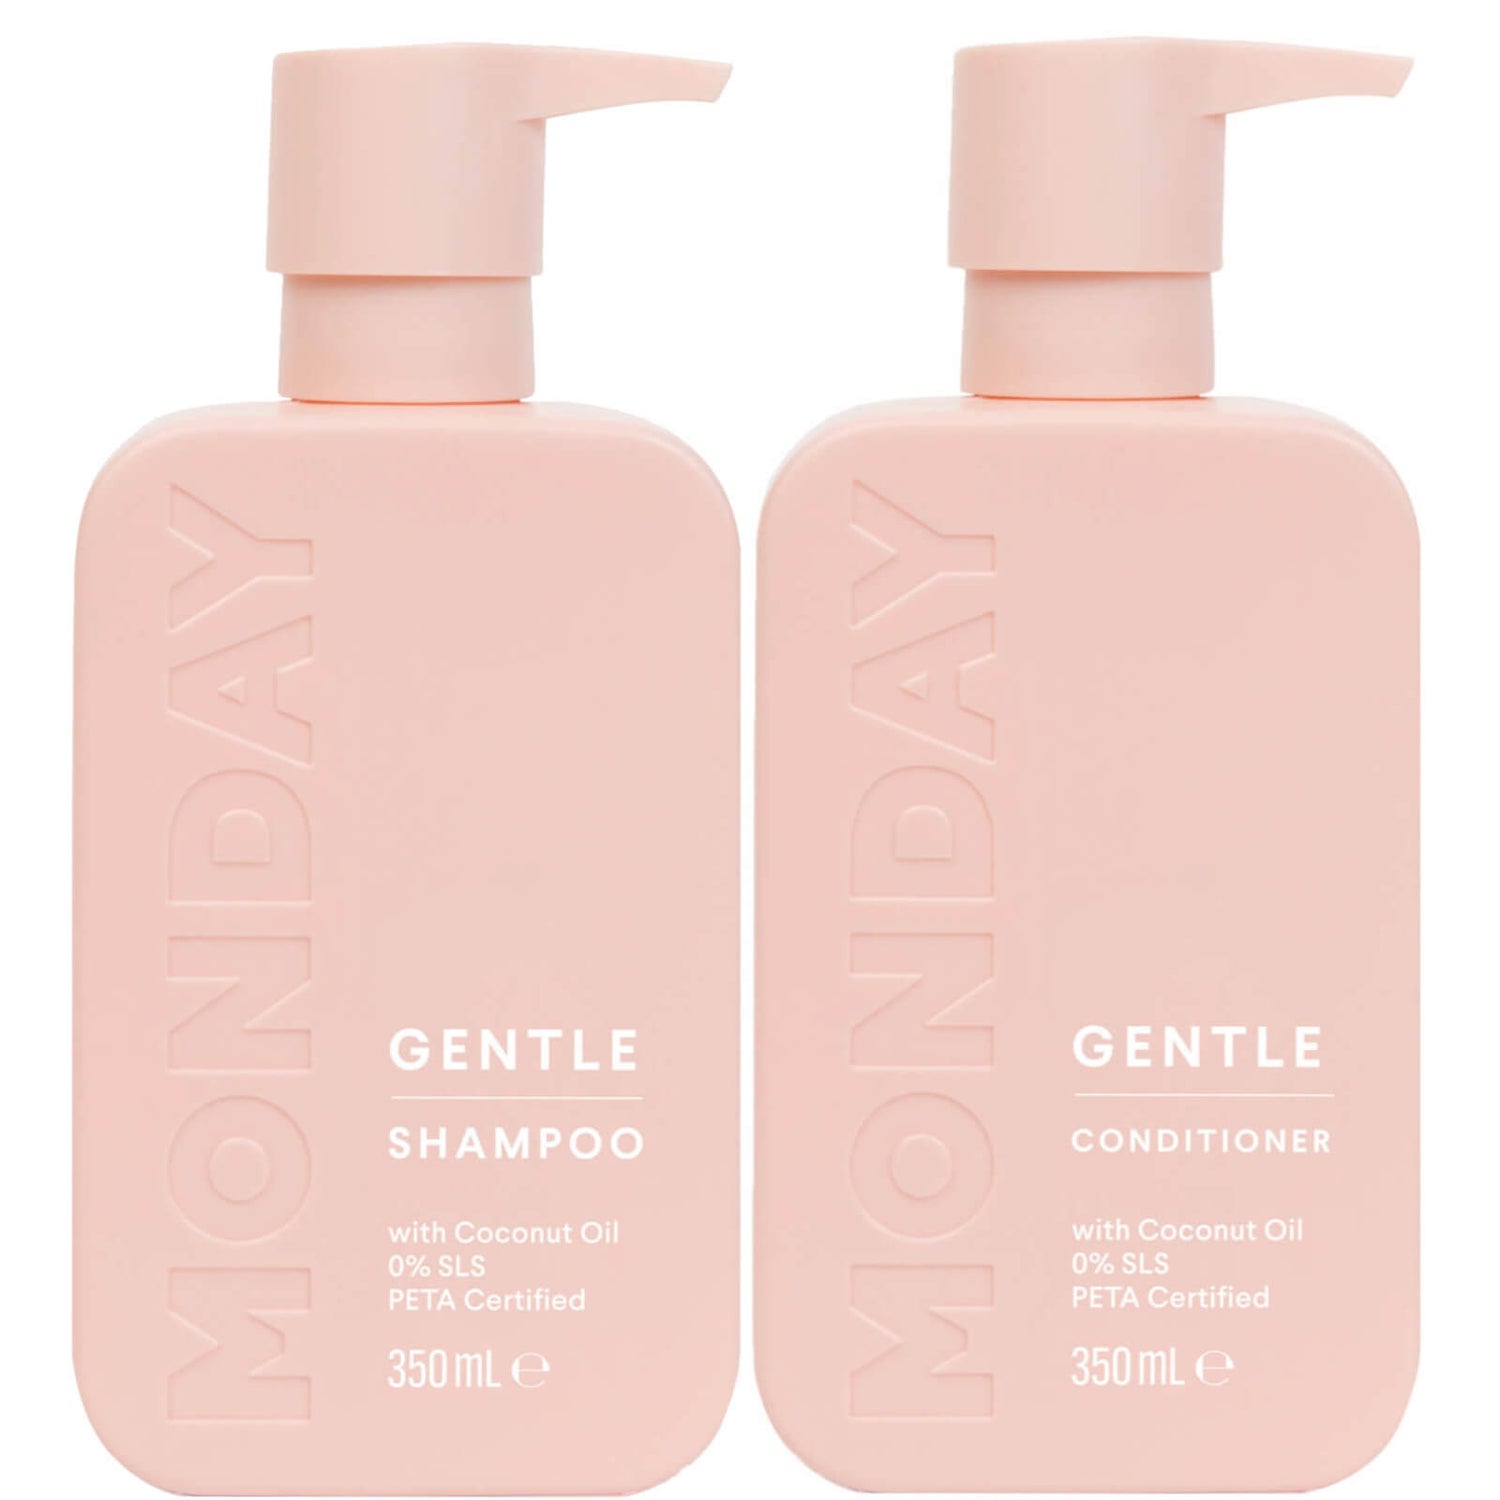 MONDAY Haircare Gentle Shampoo and Conditioner Duo